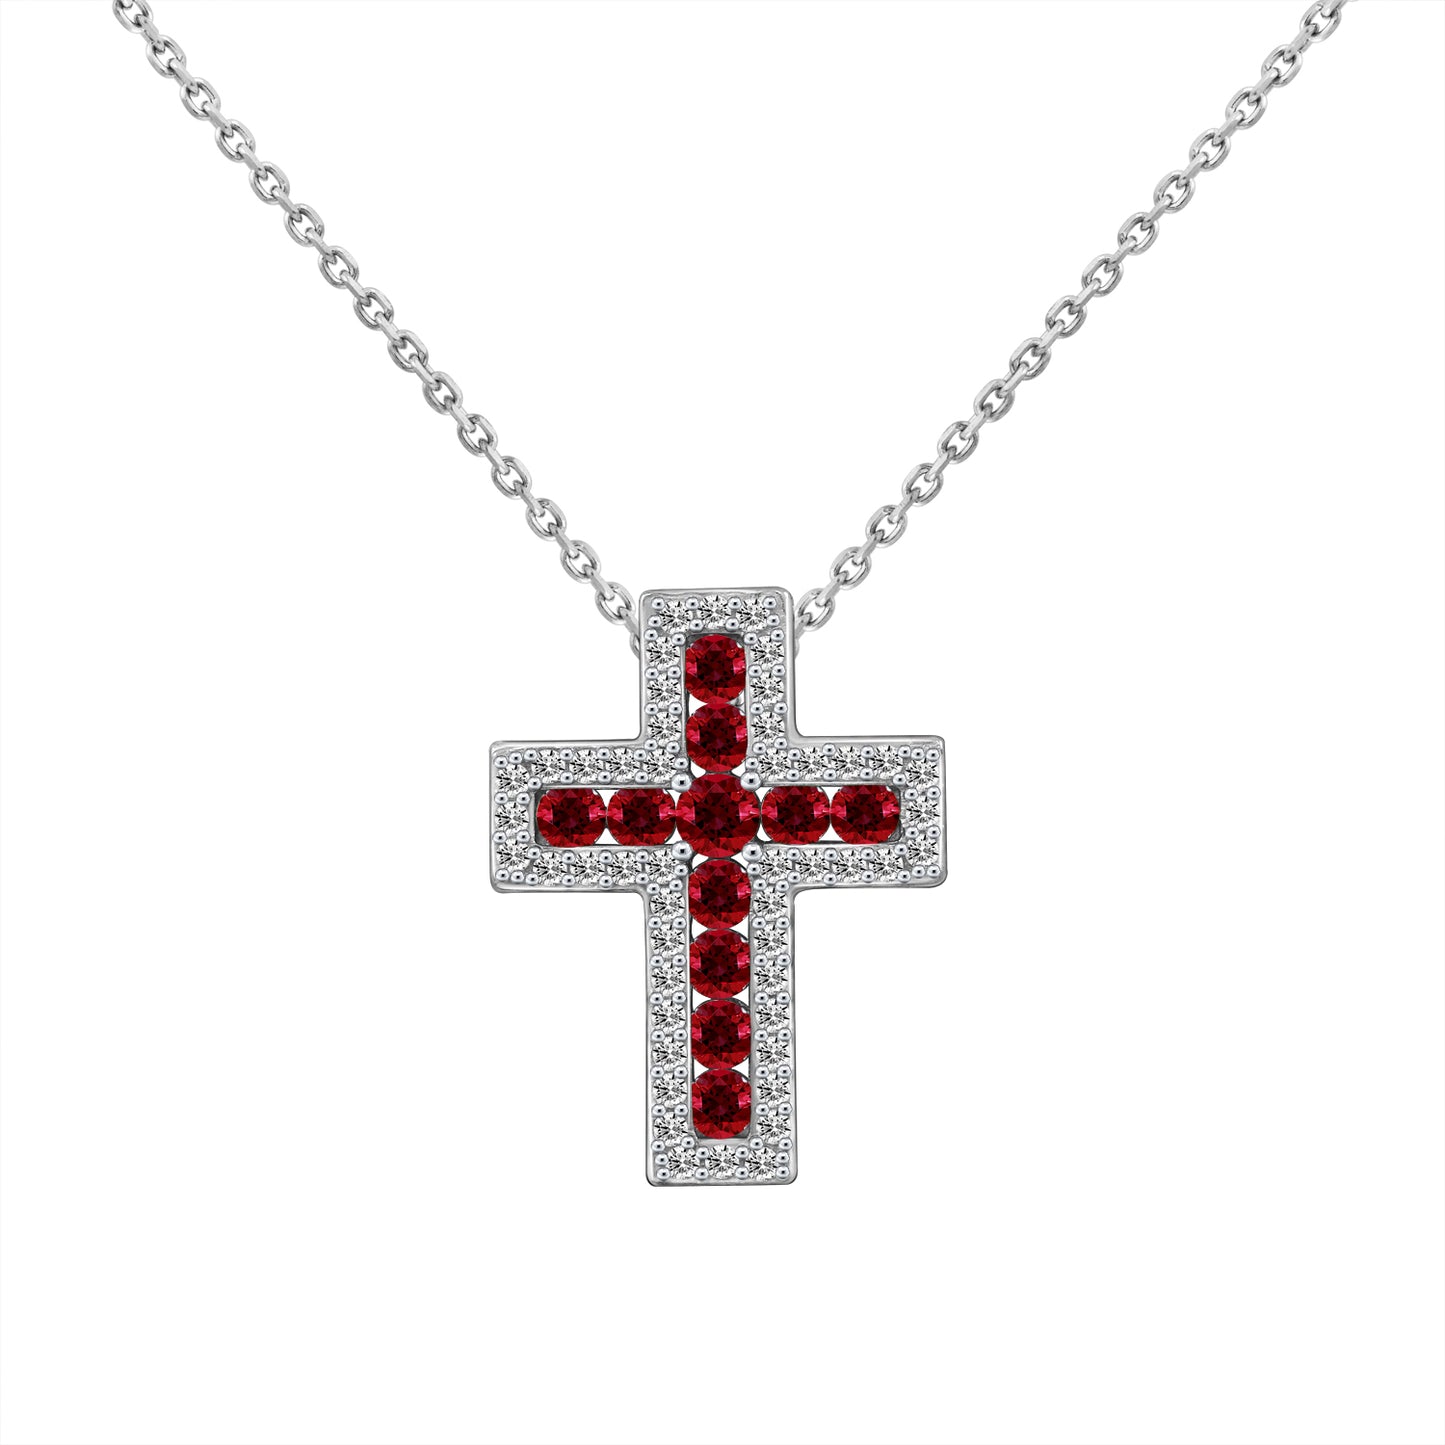 Rounds of Cross Pendant Necklace